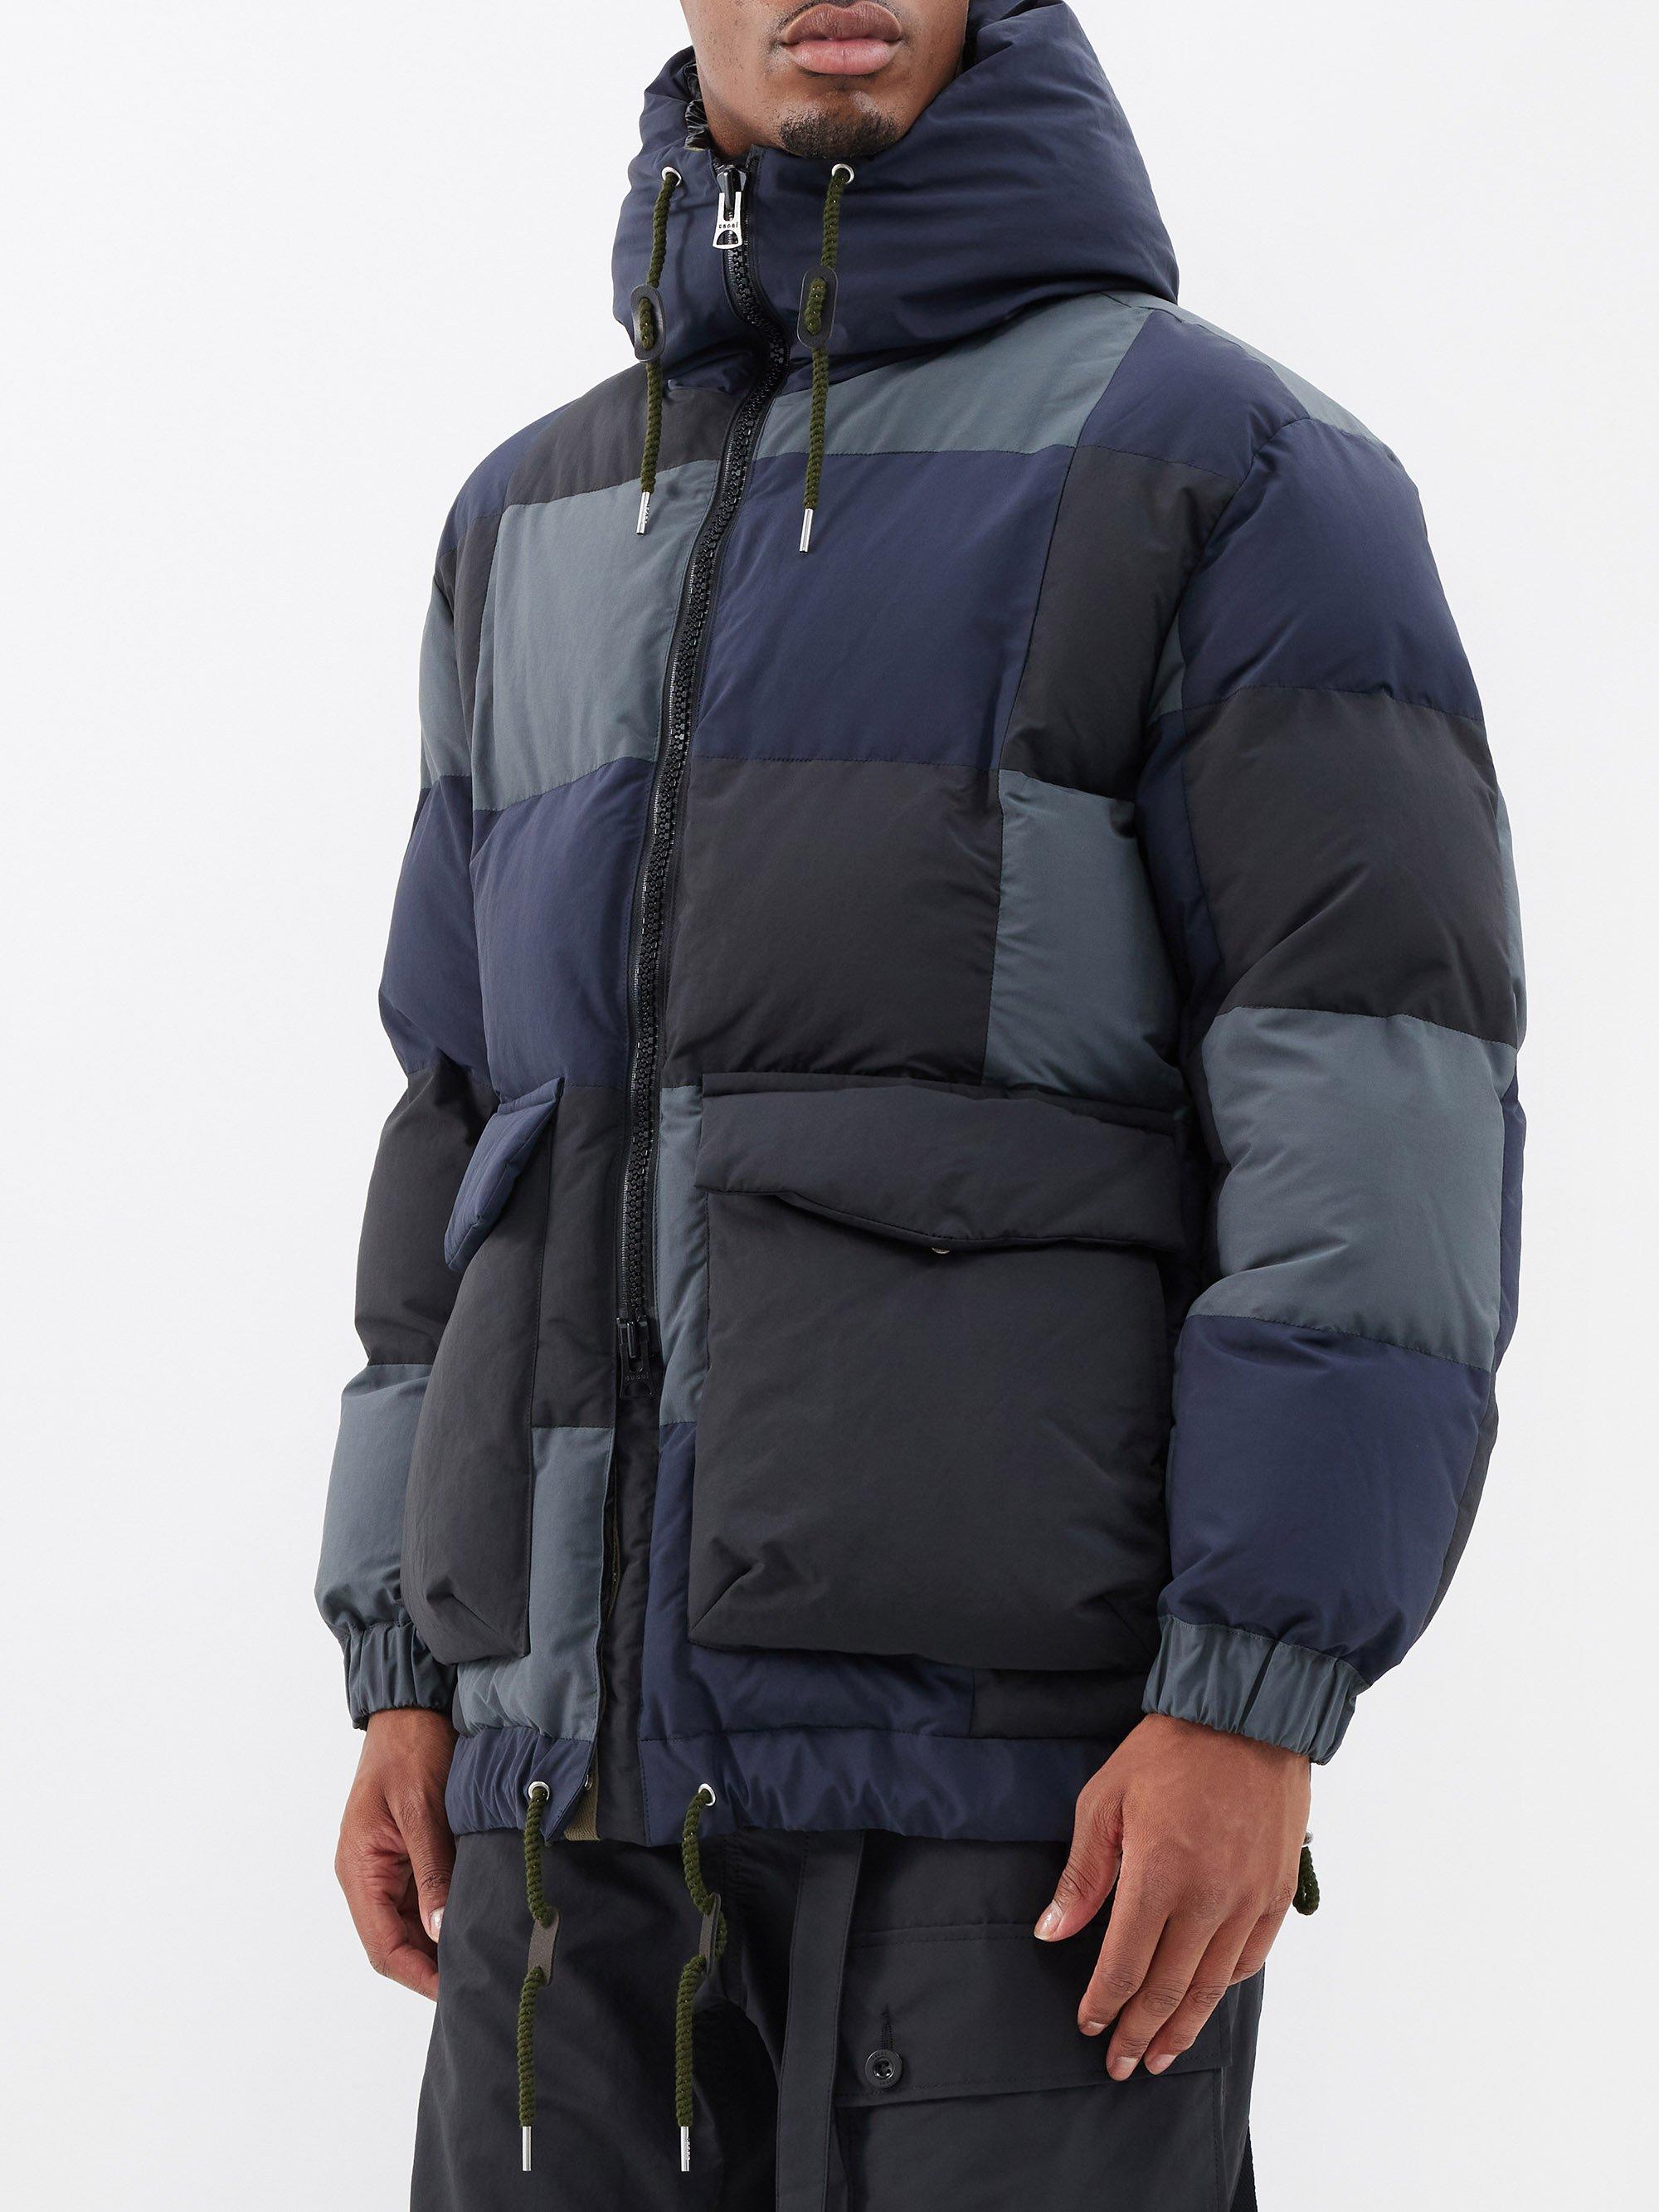 Sacai Patchwork Strapped Puffer Jacket in Blue for Men | Lyst